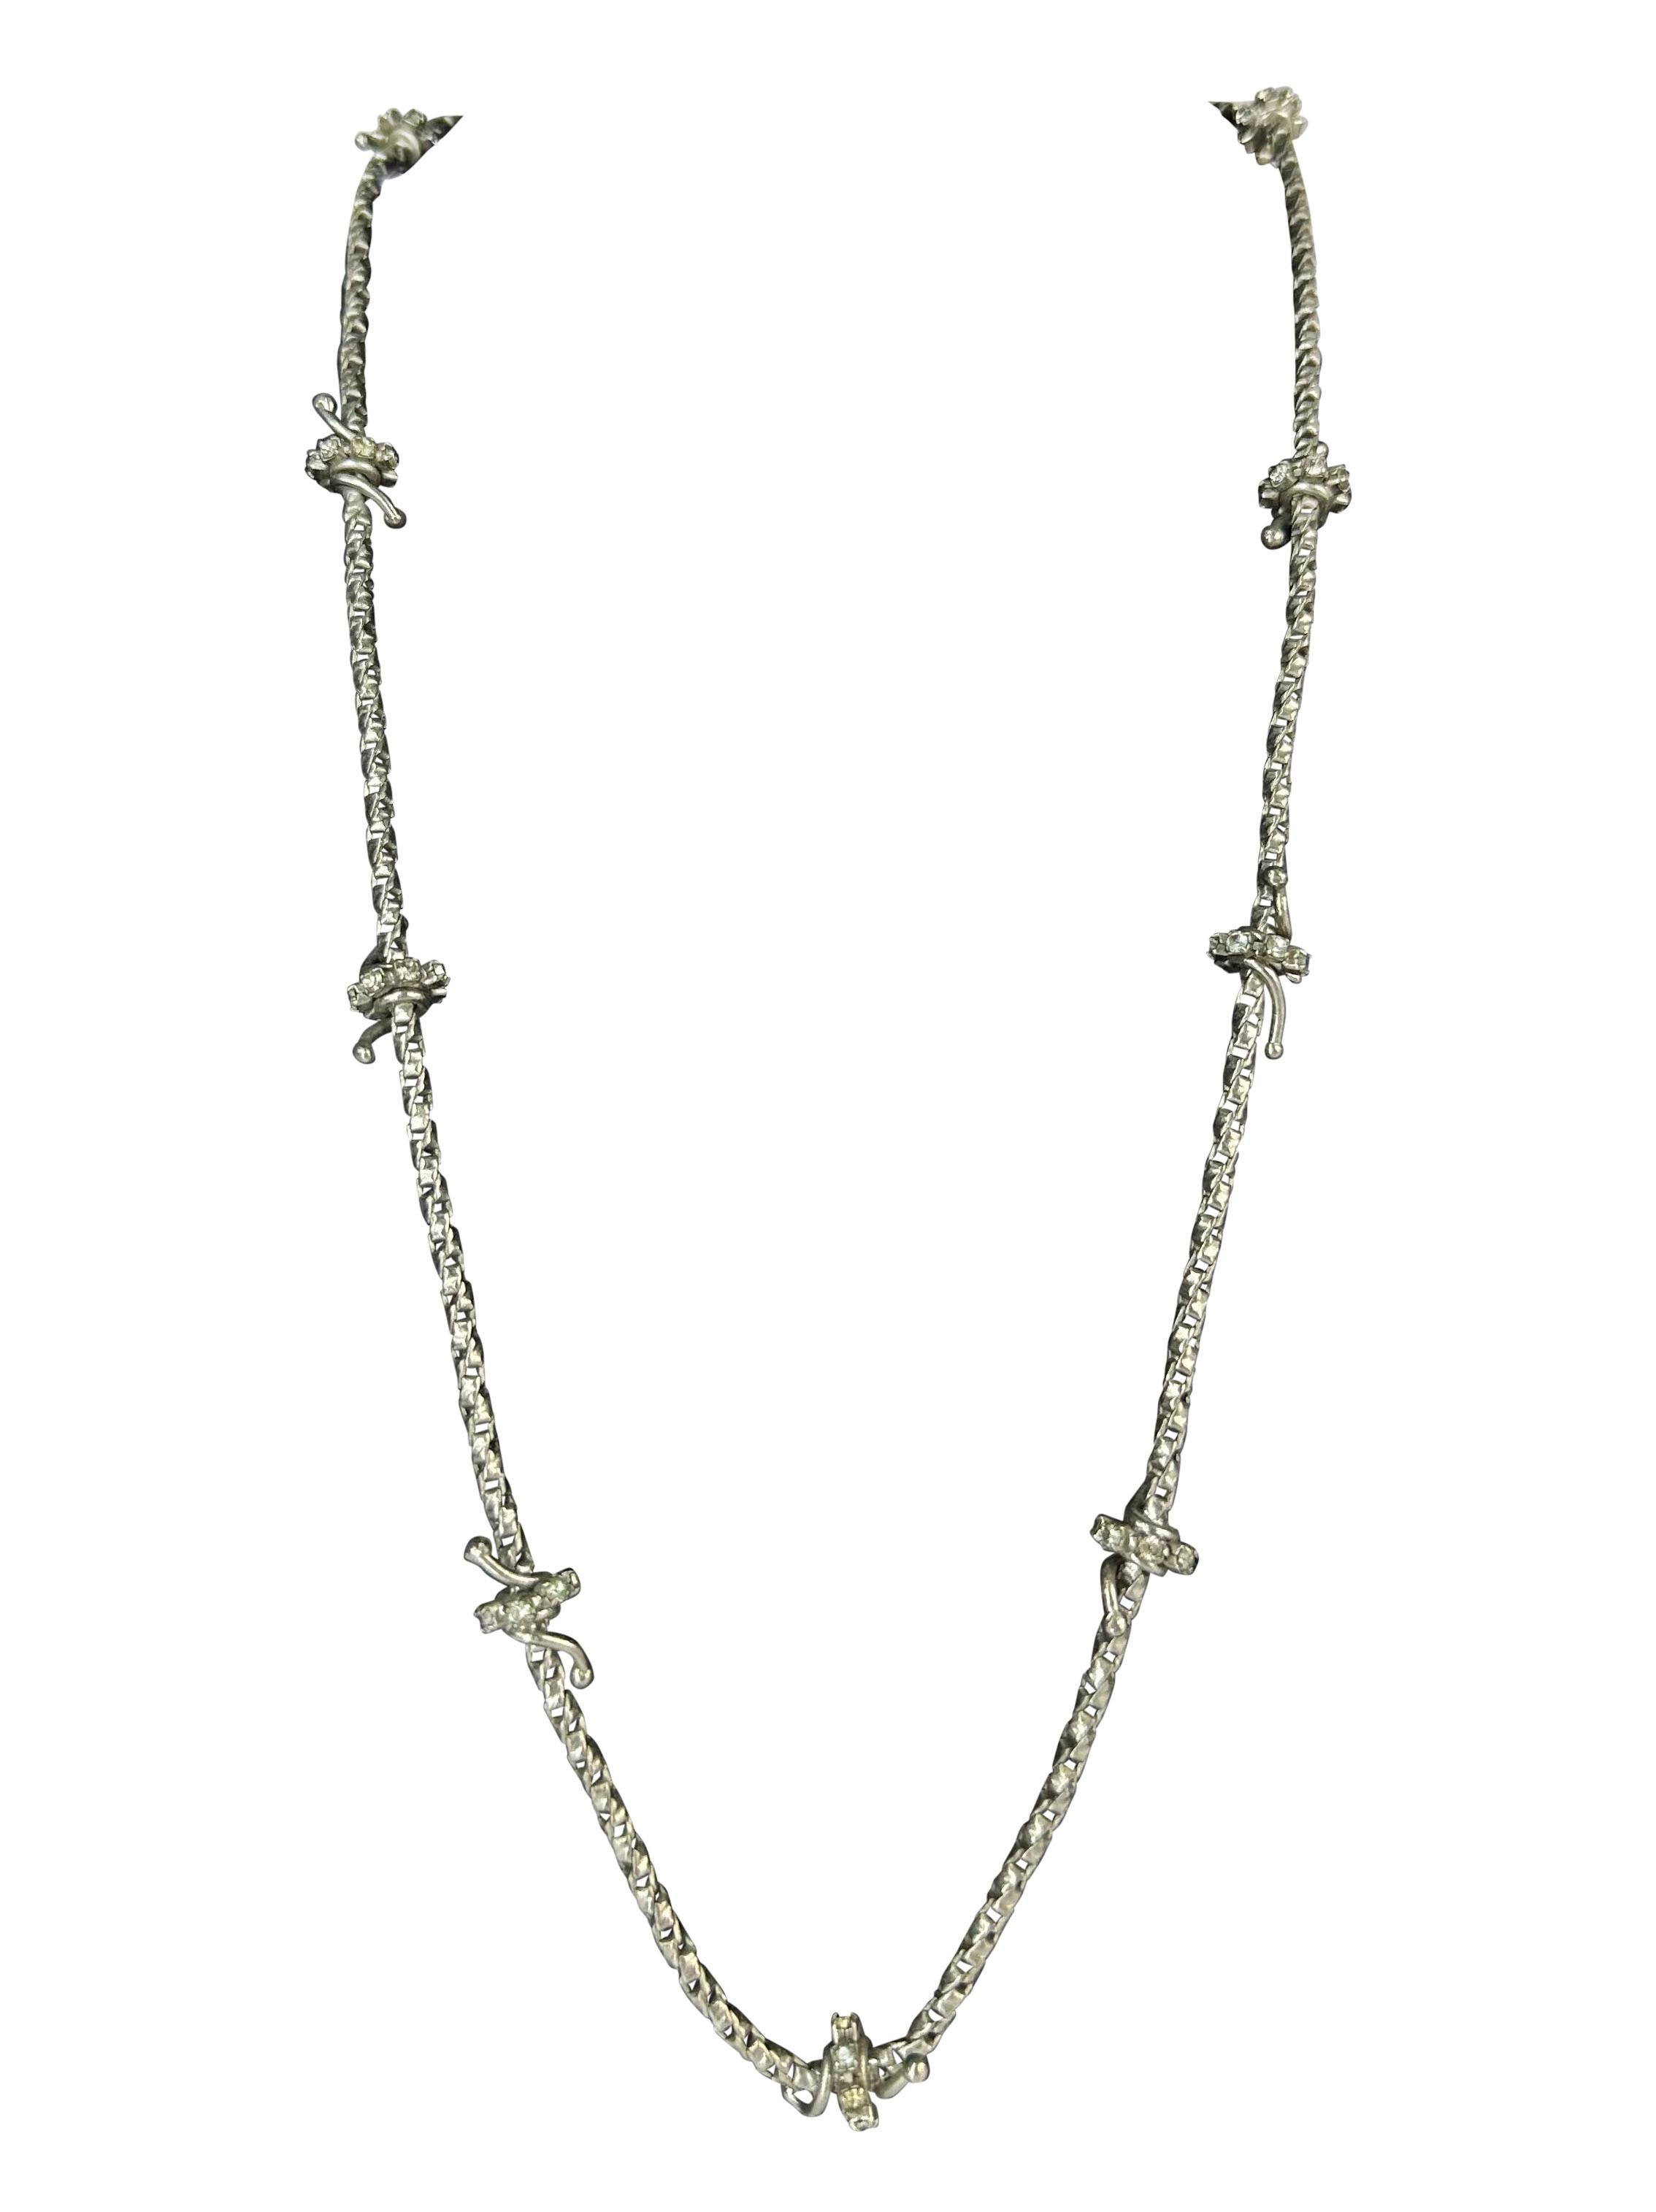 Presenting a silver-tone rhinestone accented Gianni Versace 'bared wire' necklace, designed by Donatella Versace. From the Fall/Winter 1998 collection, this necklace is constructed of a thin silver-tone metal chain with rhinestone accented wrapped